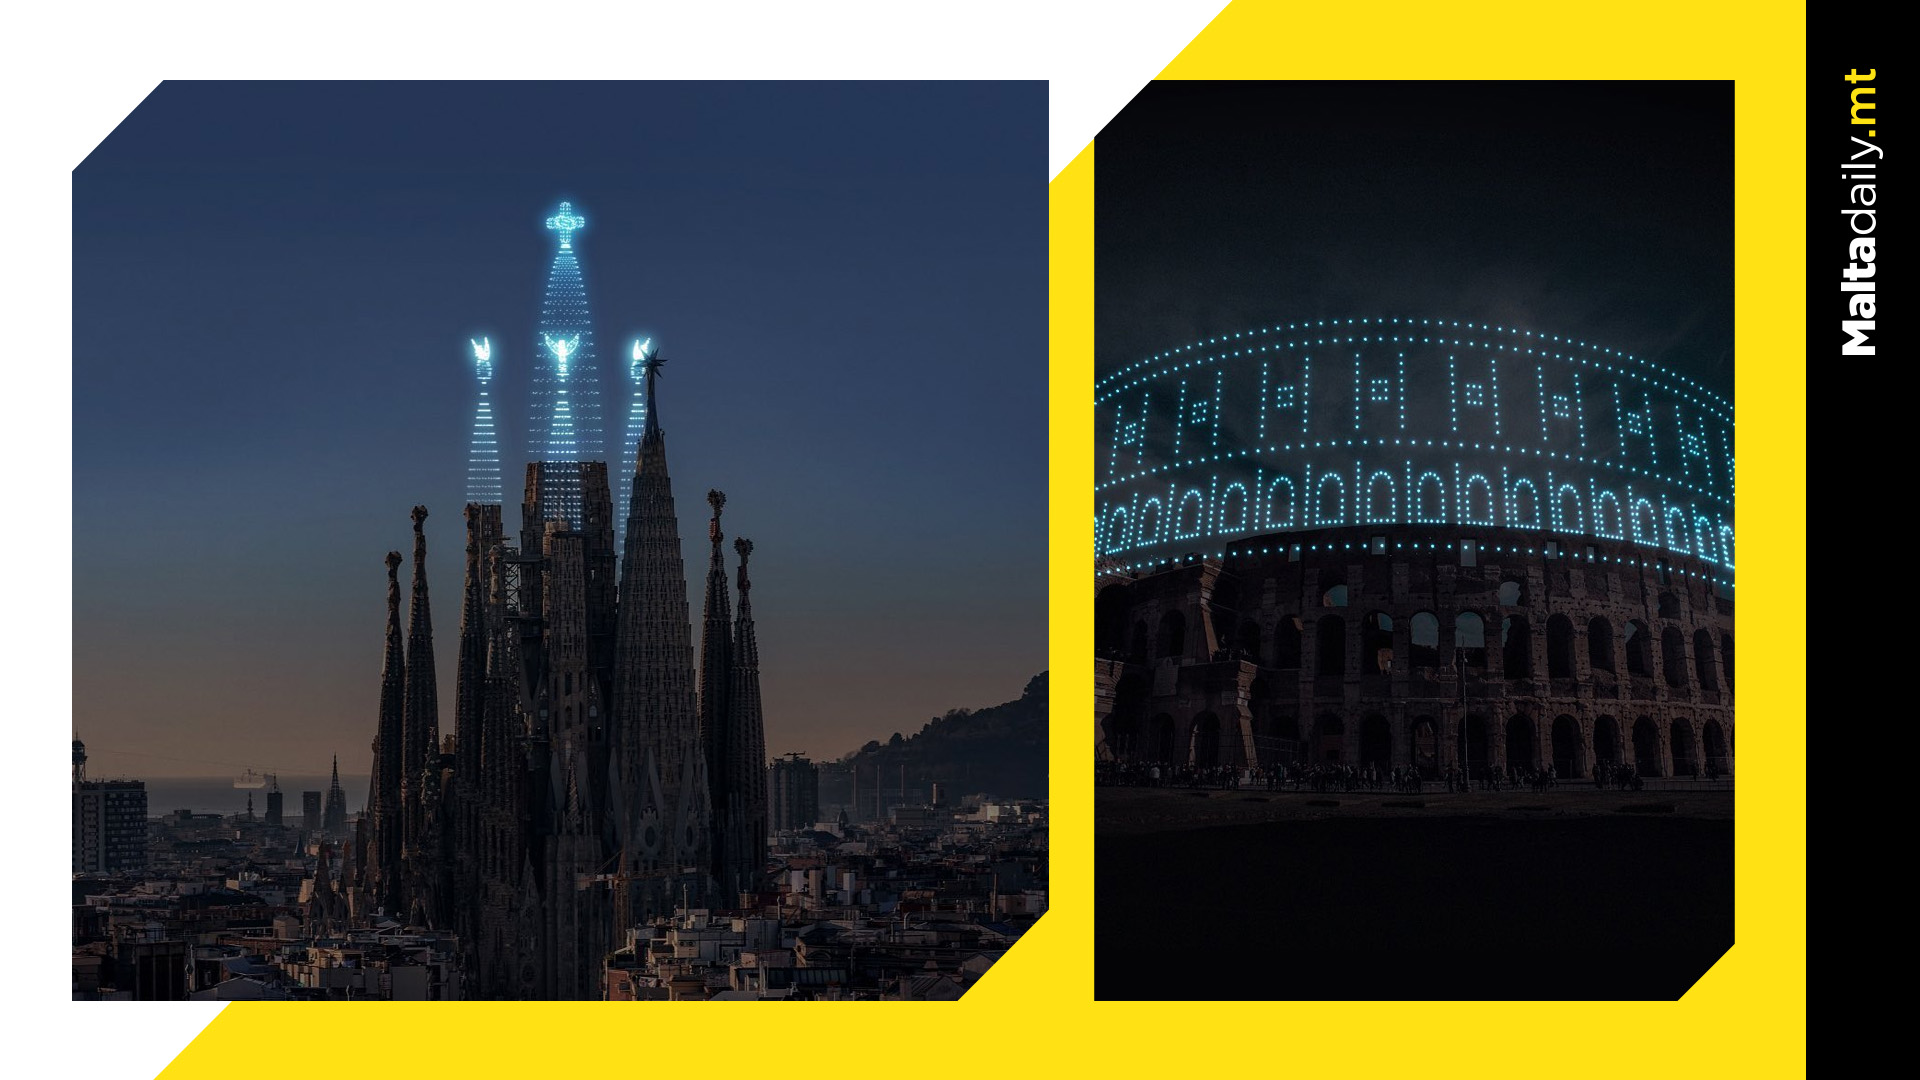 Artists show what landmarks used to look light with astounding drone display